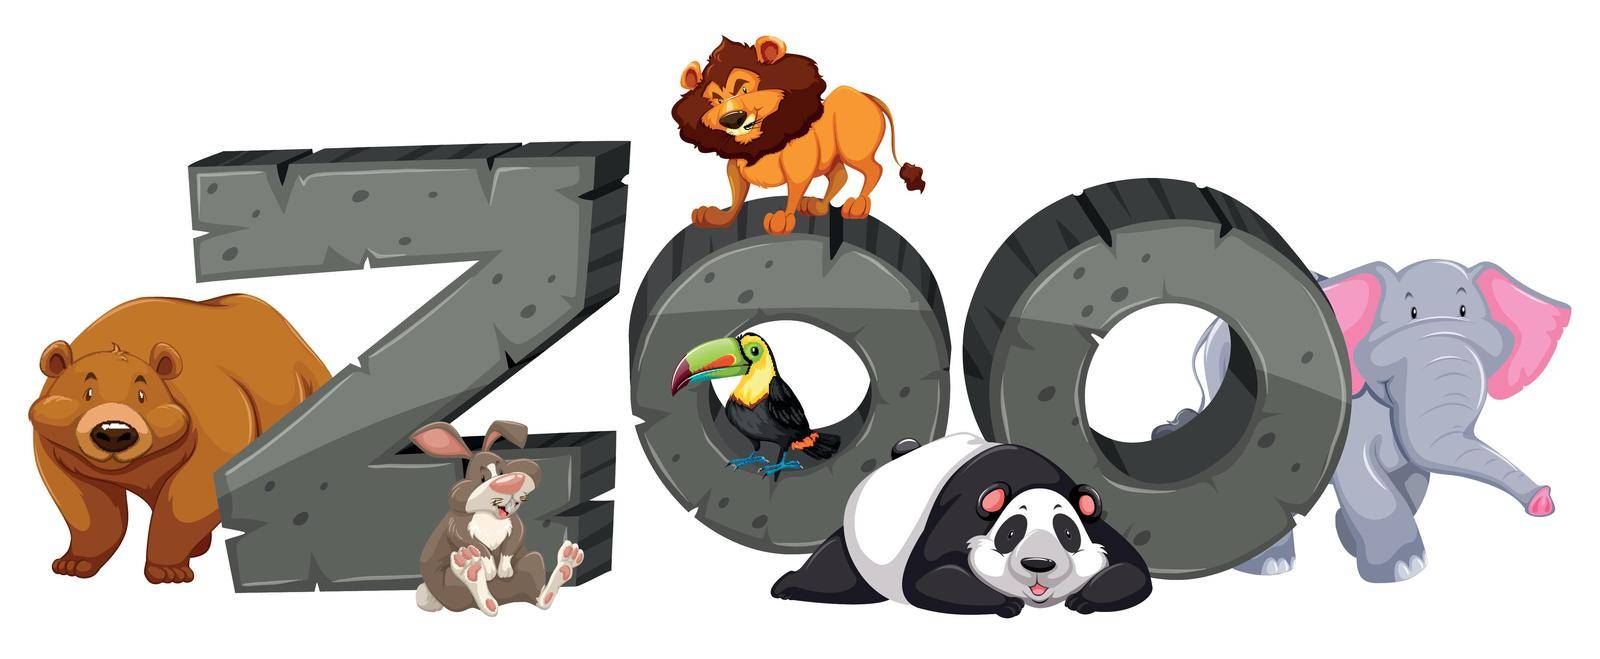 Zoo sign and many animals illustration